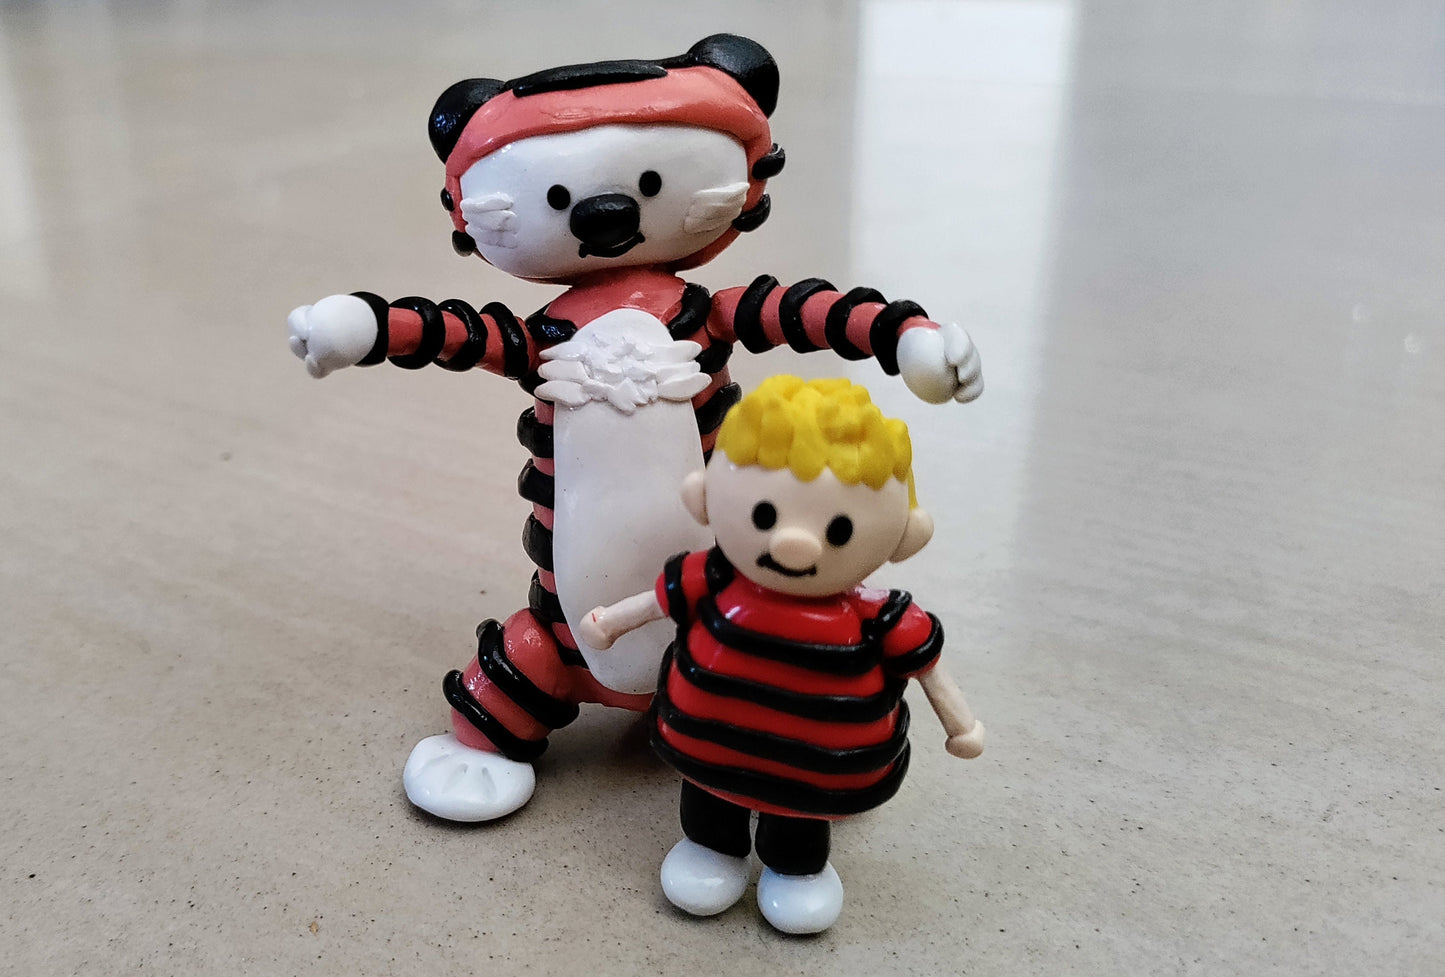 Calvin and Hobbes Figures/Collectables, dolls, figurines, toys, miniatures